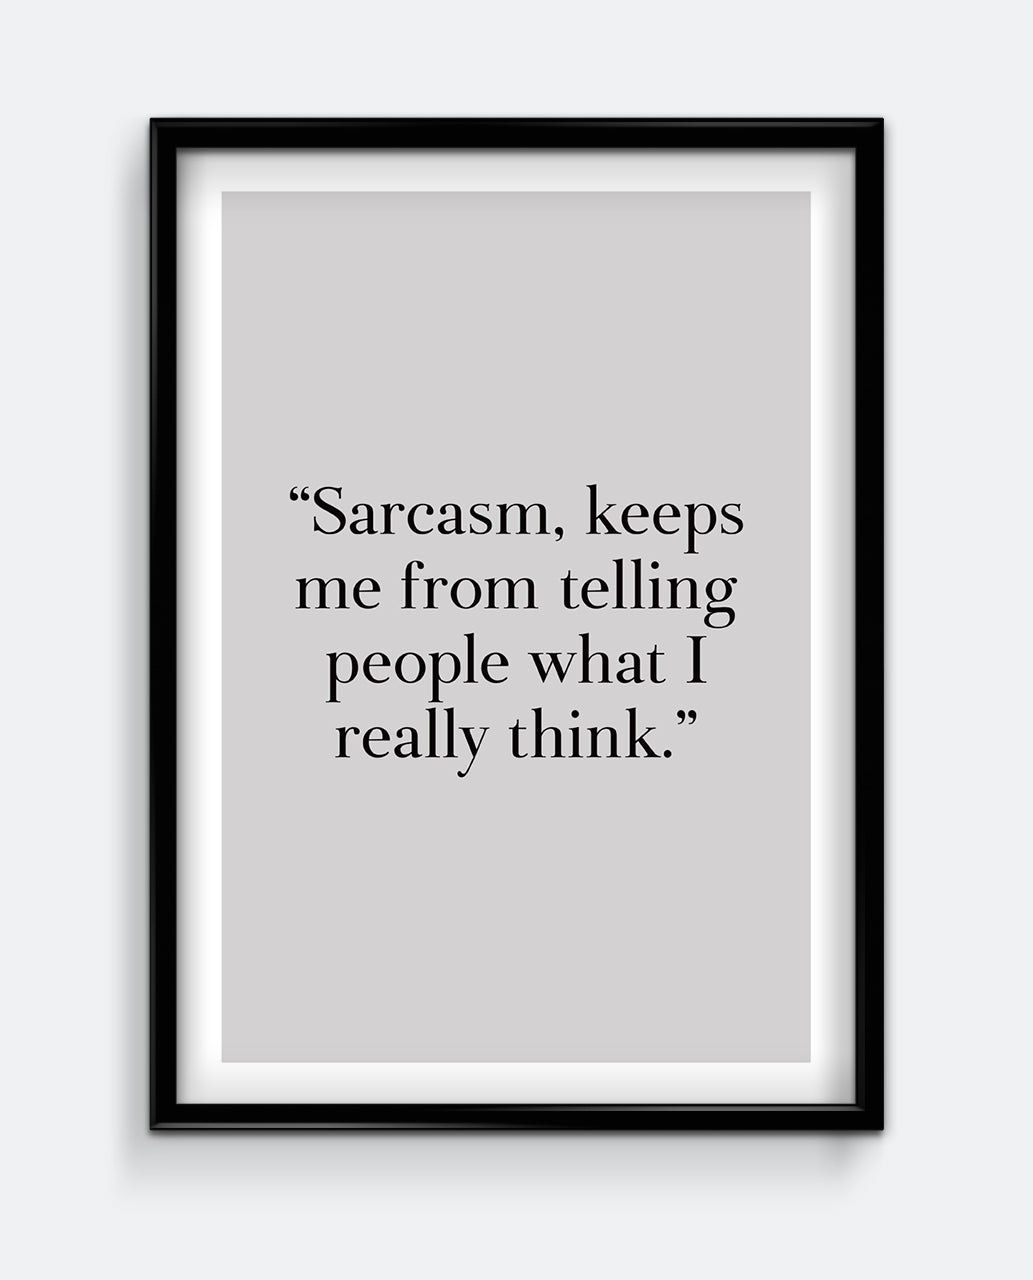 Sarcasm, keeps me from telling people what I really think